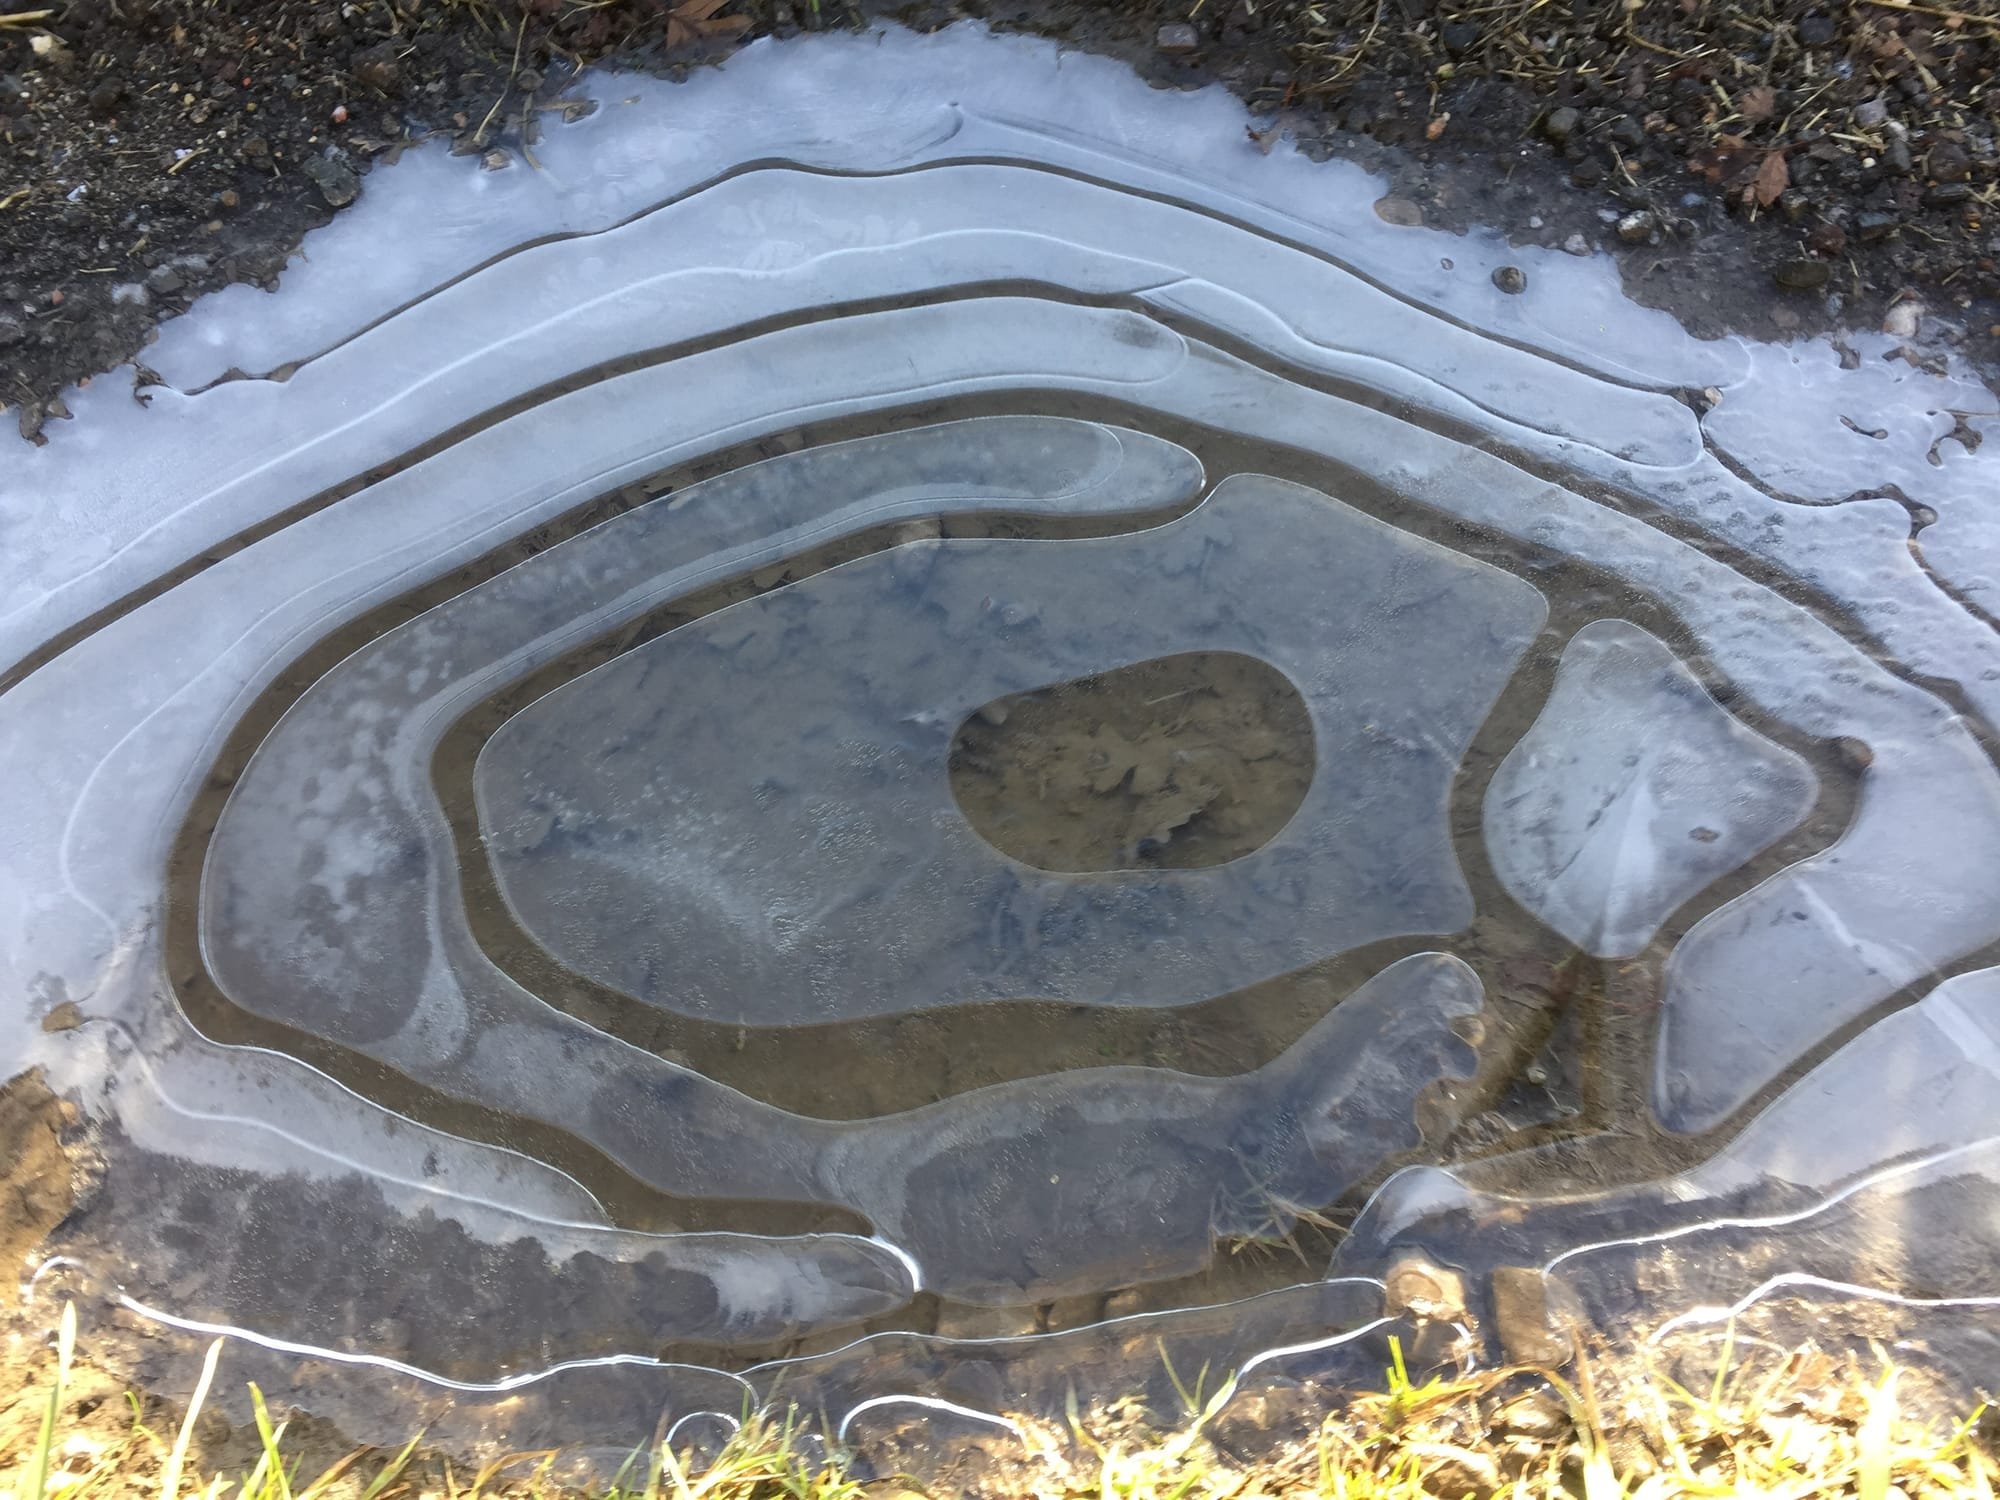 Ice Puddle 1, Beddingham, East Sussex